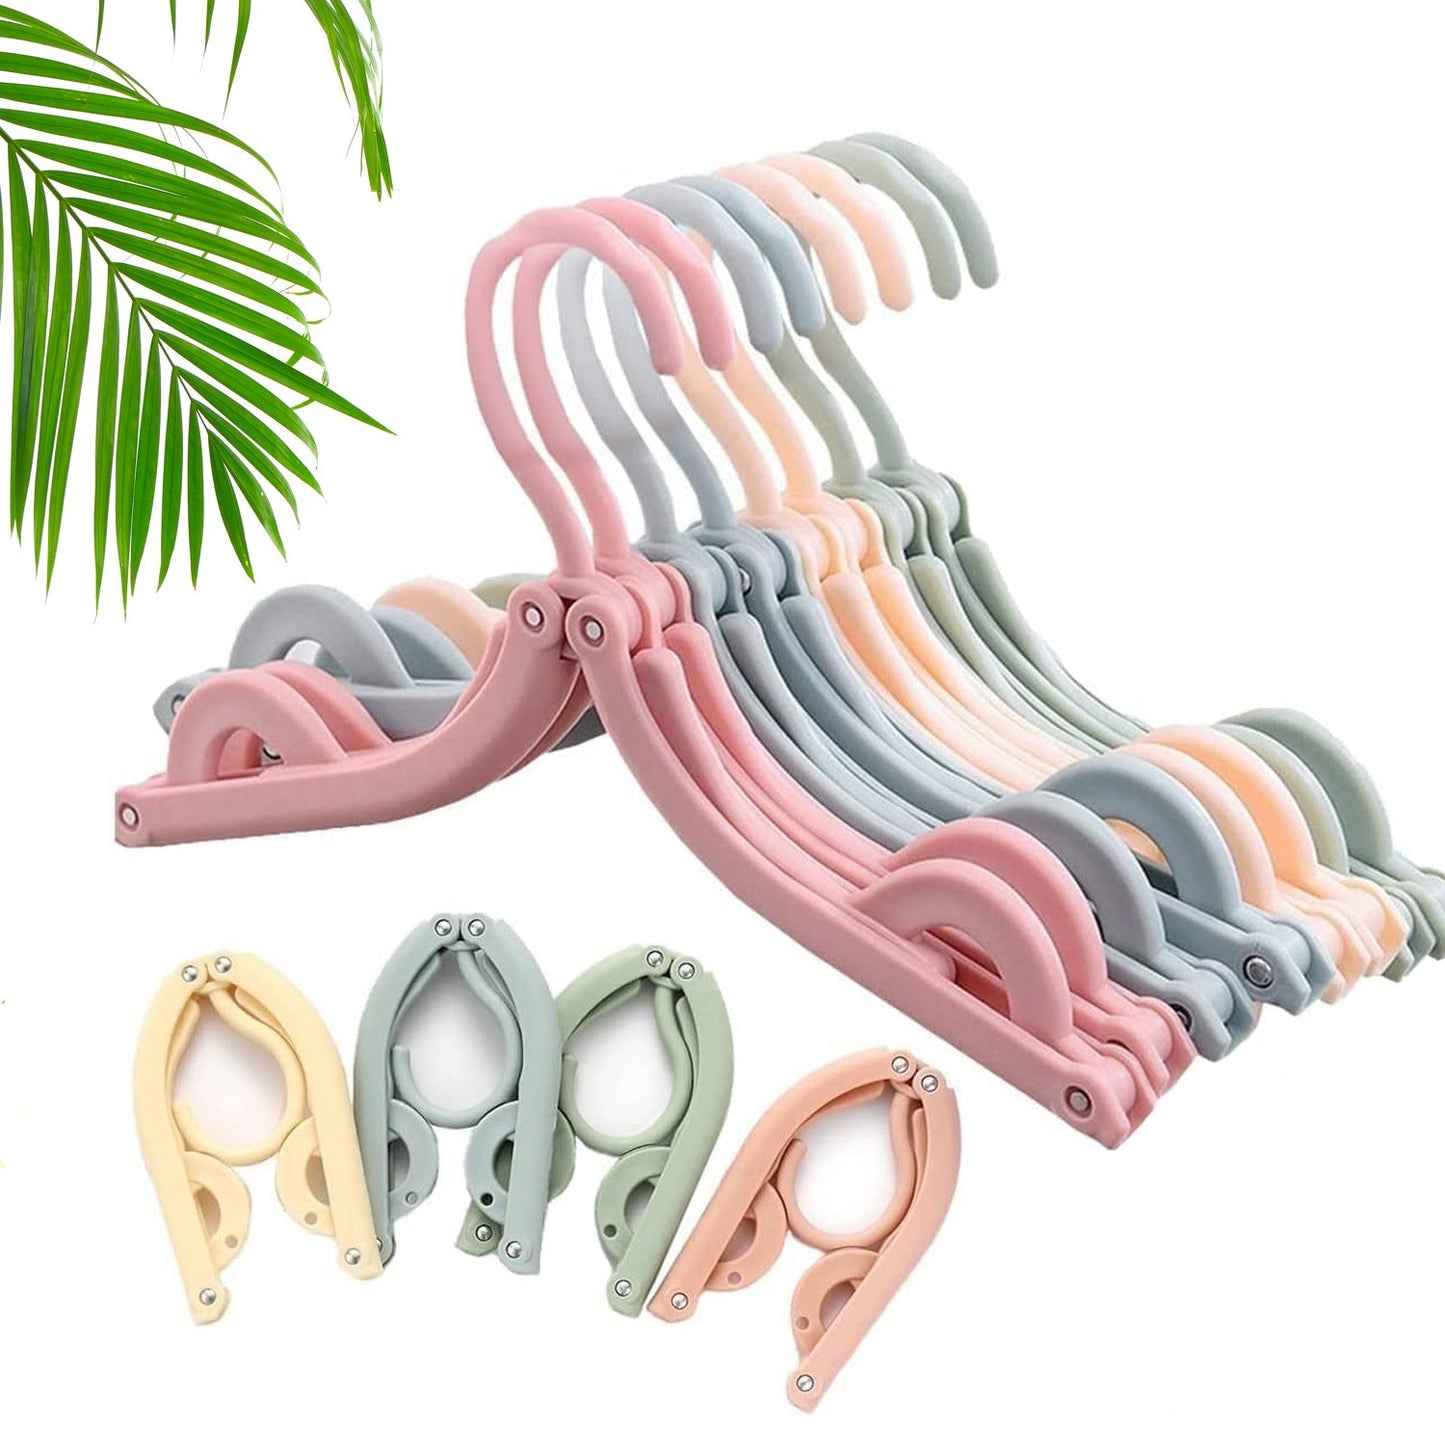 1432B 10 Pcs Portable Folding Clothes Hanger Creative Travel Easy to Carry Clothes Hanger for Adults and Children